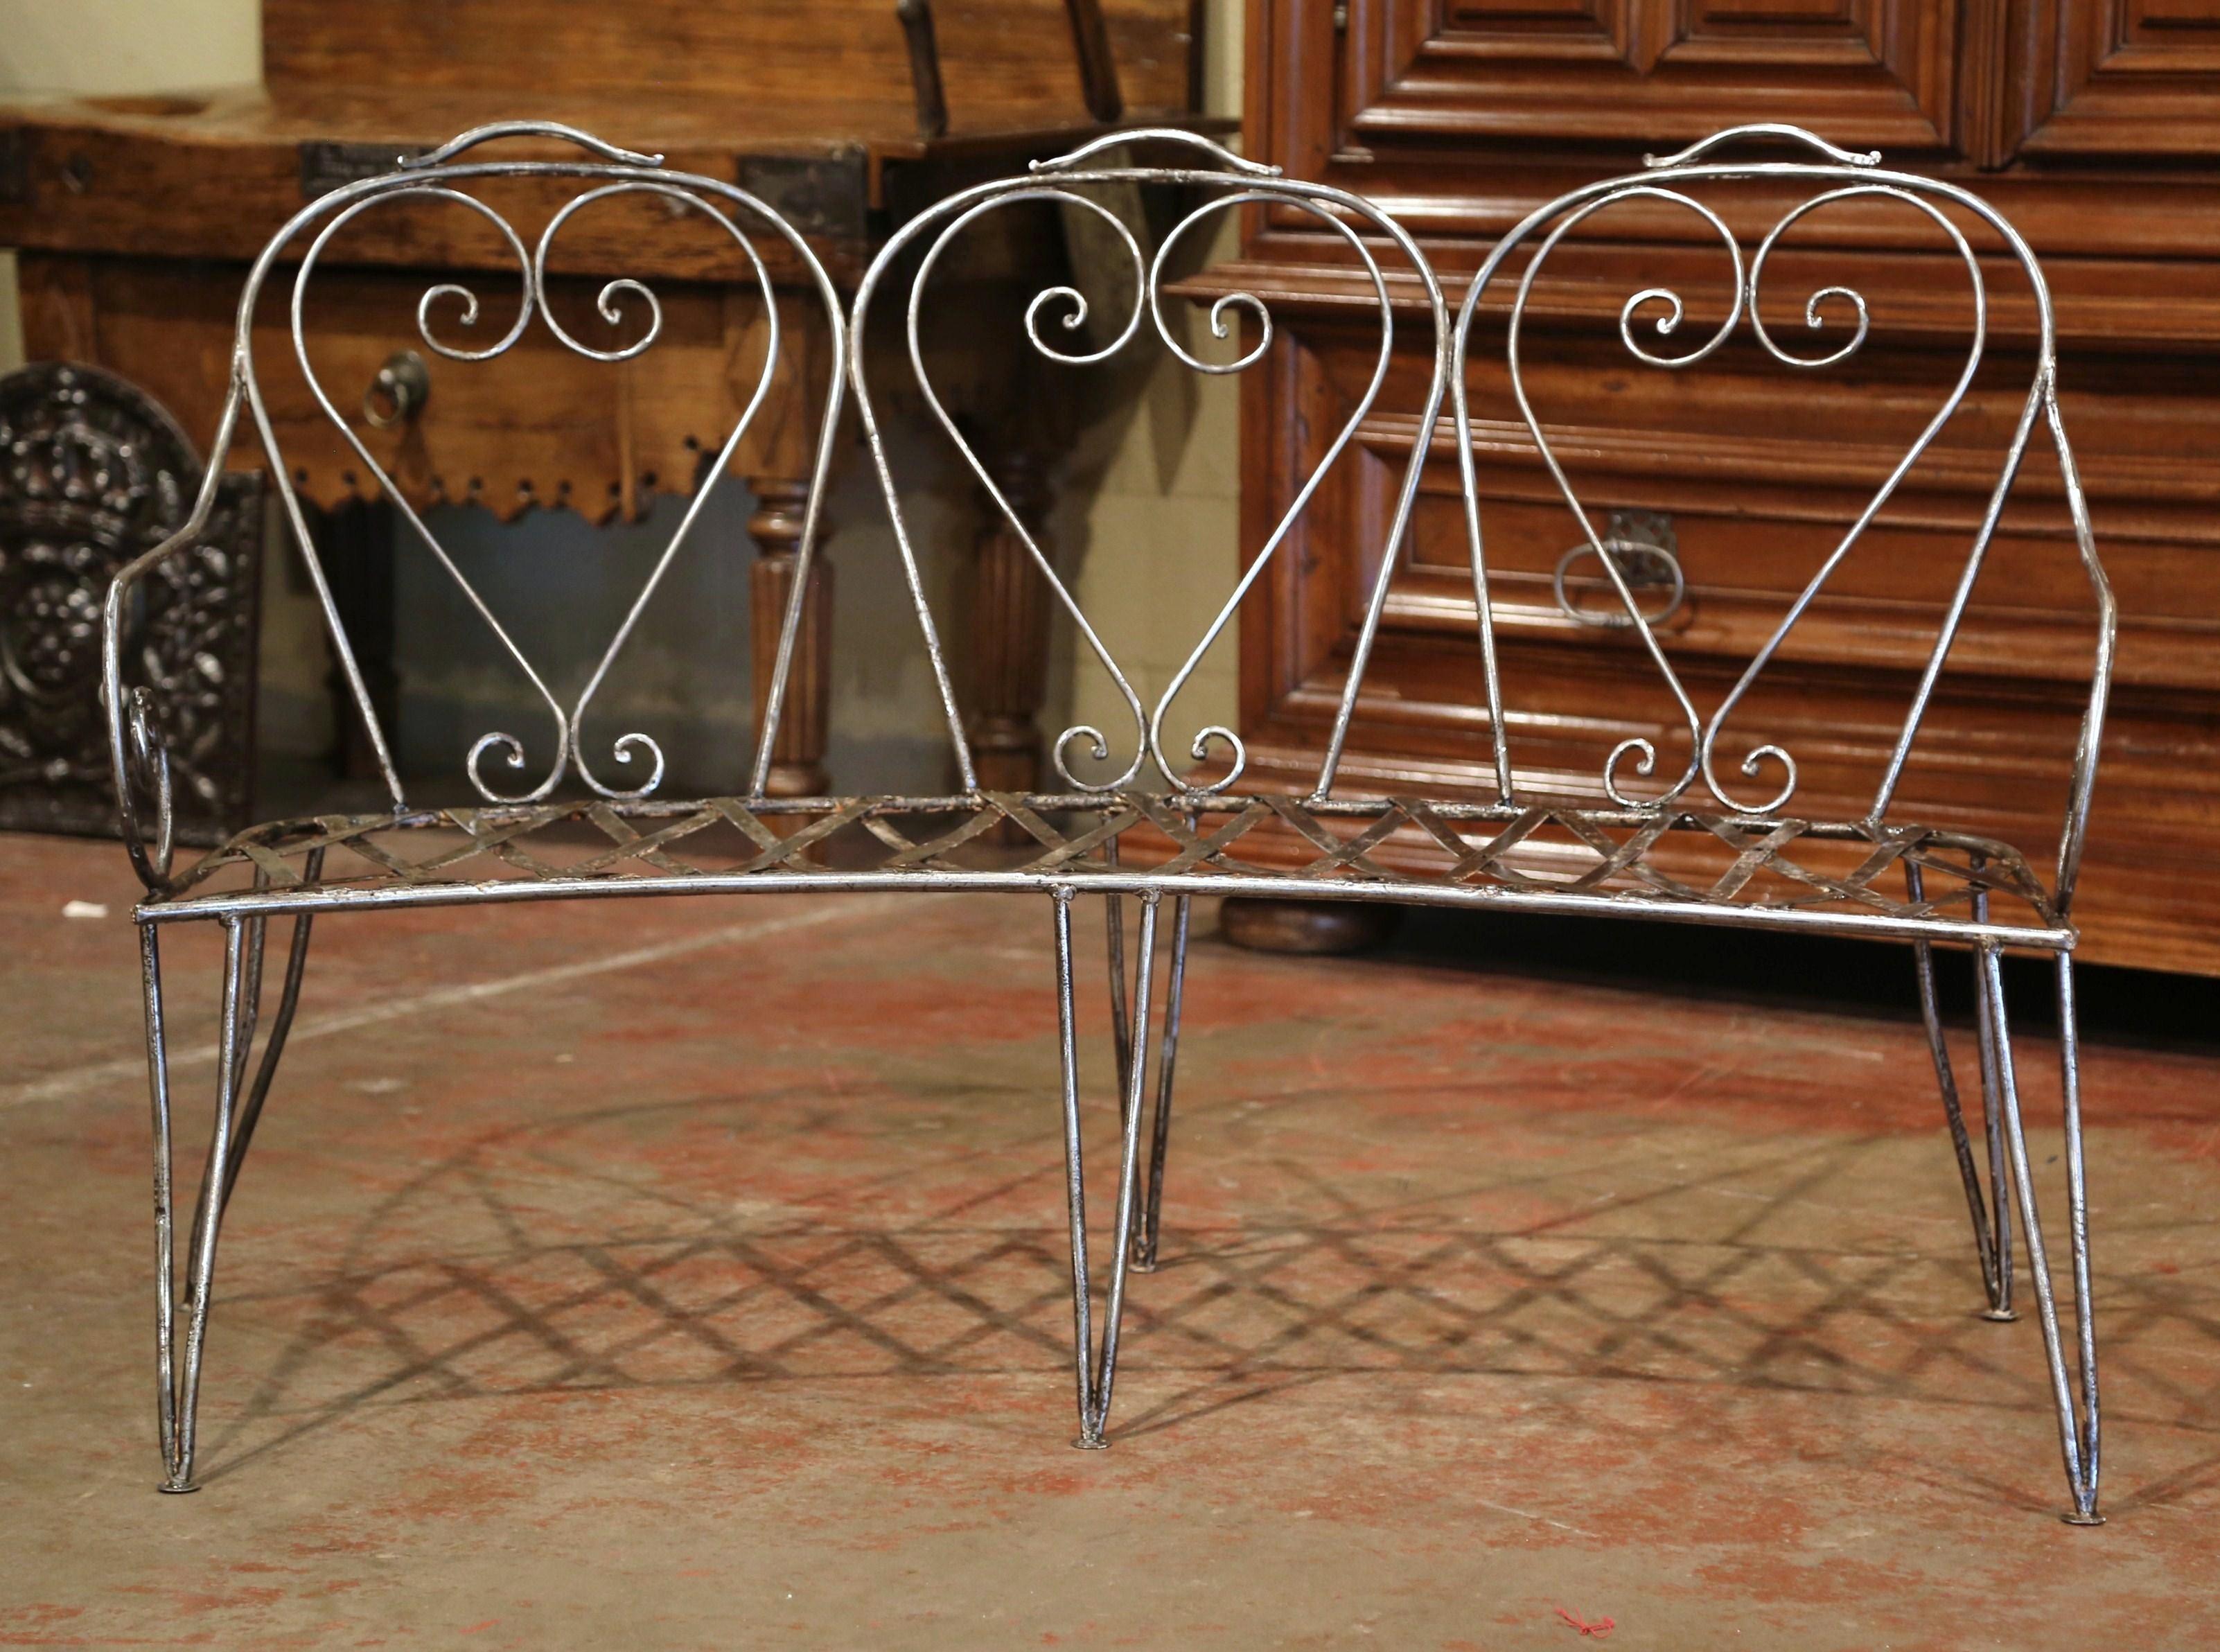 19th Century French Curved Polished Iron Three-Seat Garden Bench from Normandy In Excellent Condition For Sale In Dallas, TX